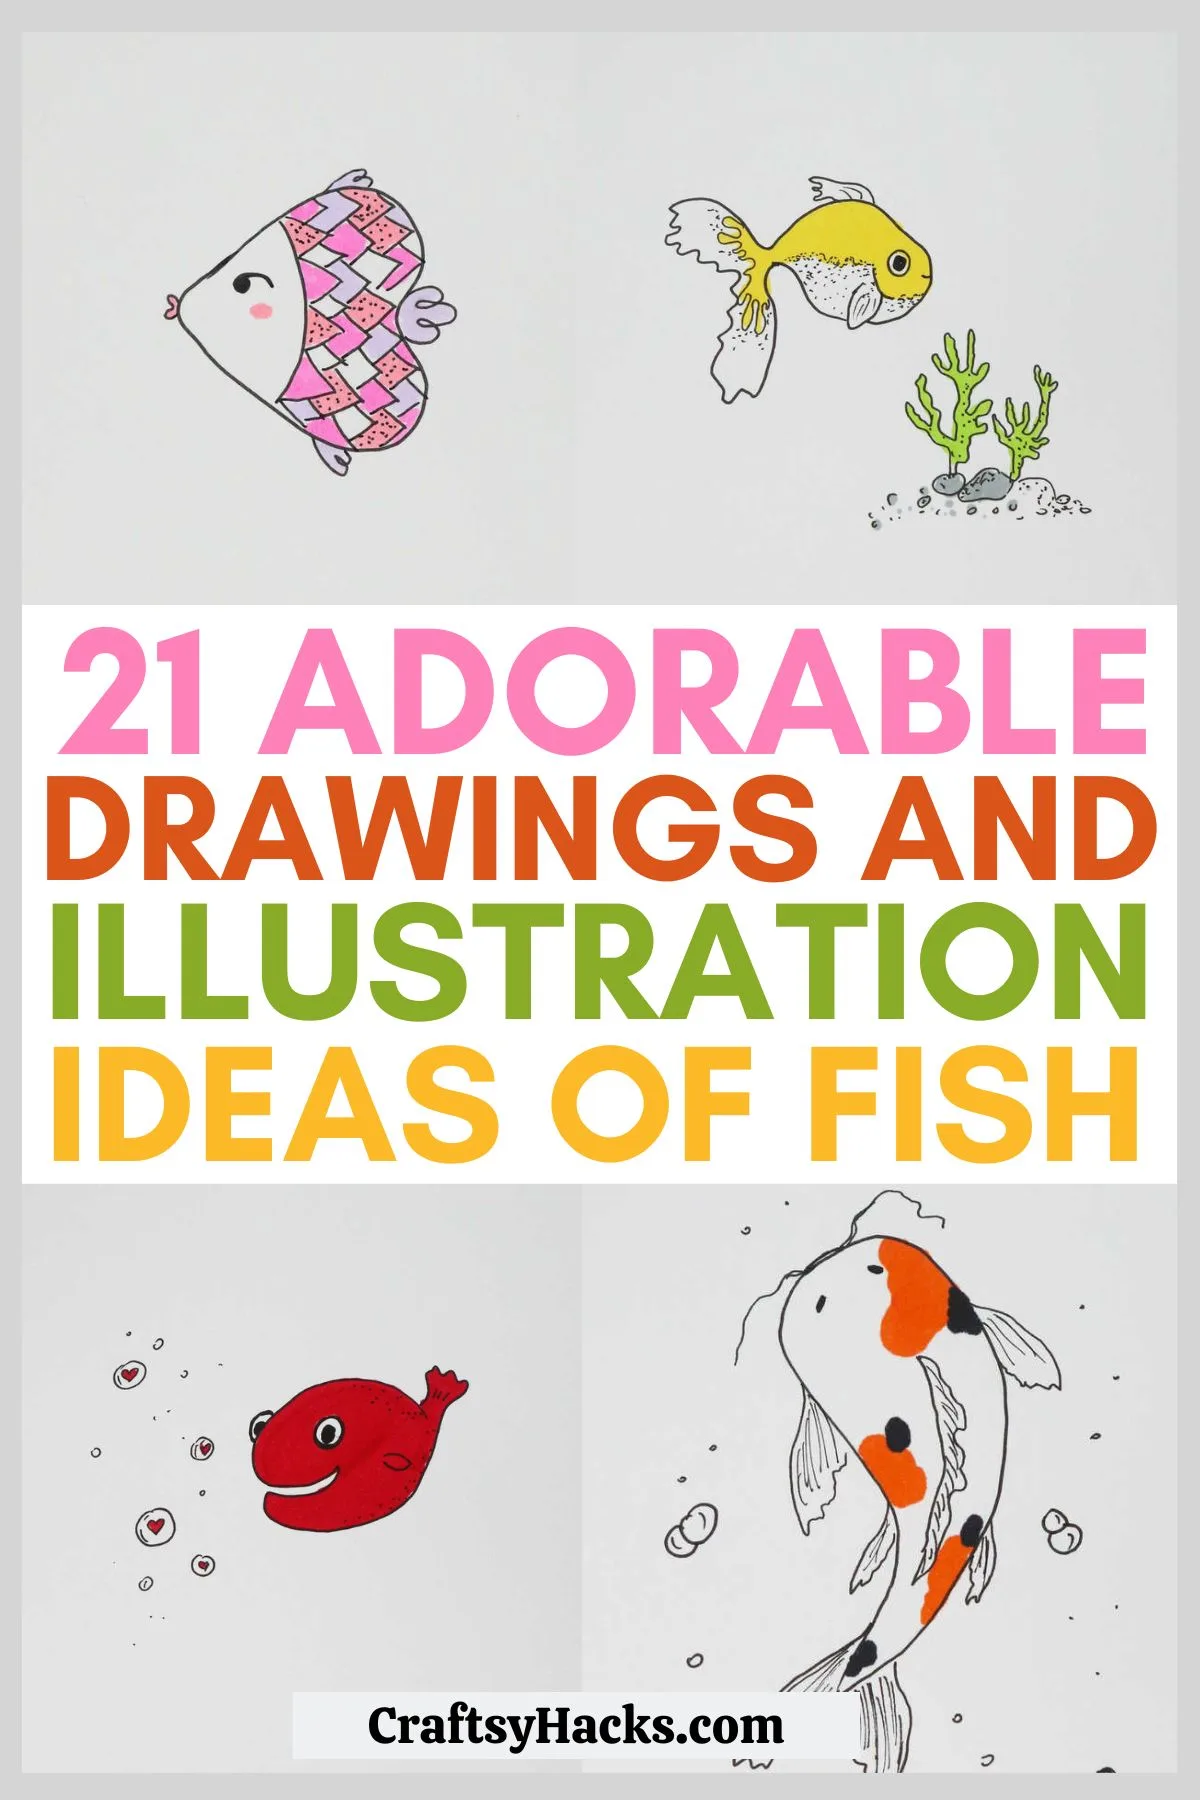 21 Drawings and Illustration Ideas of Fish.jpg